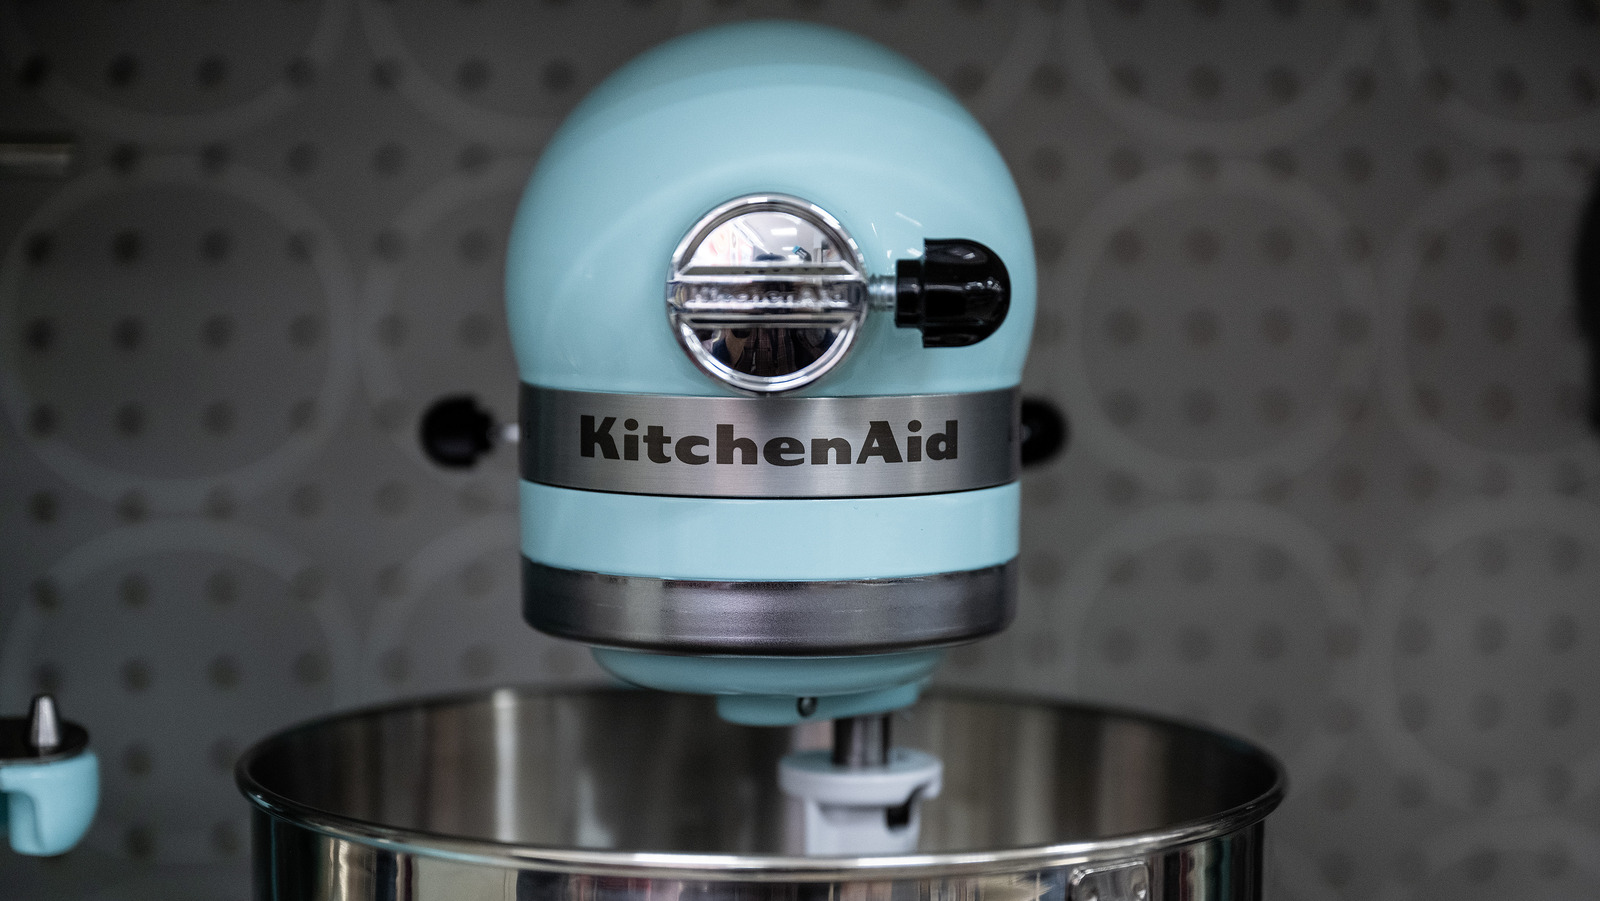 Paddle Attachment on Your KitchenAid: When to Use It